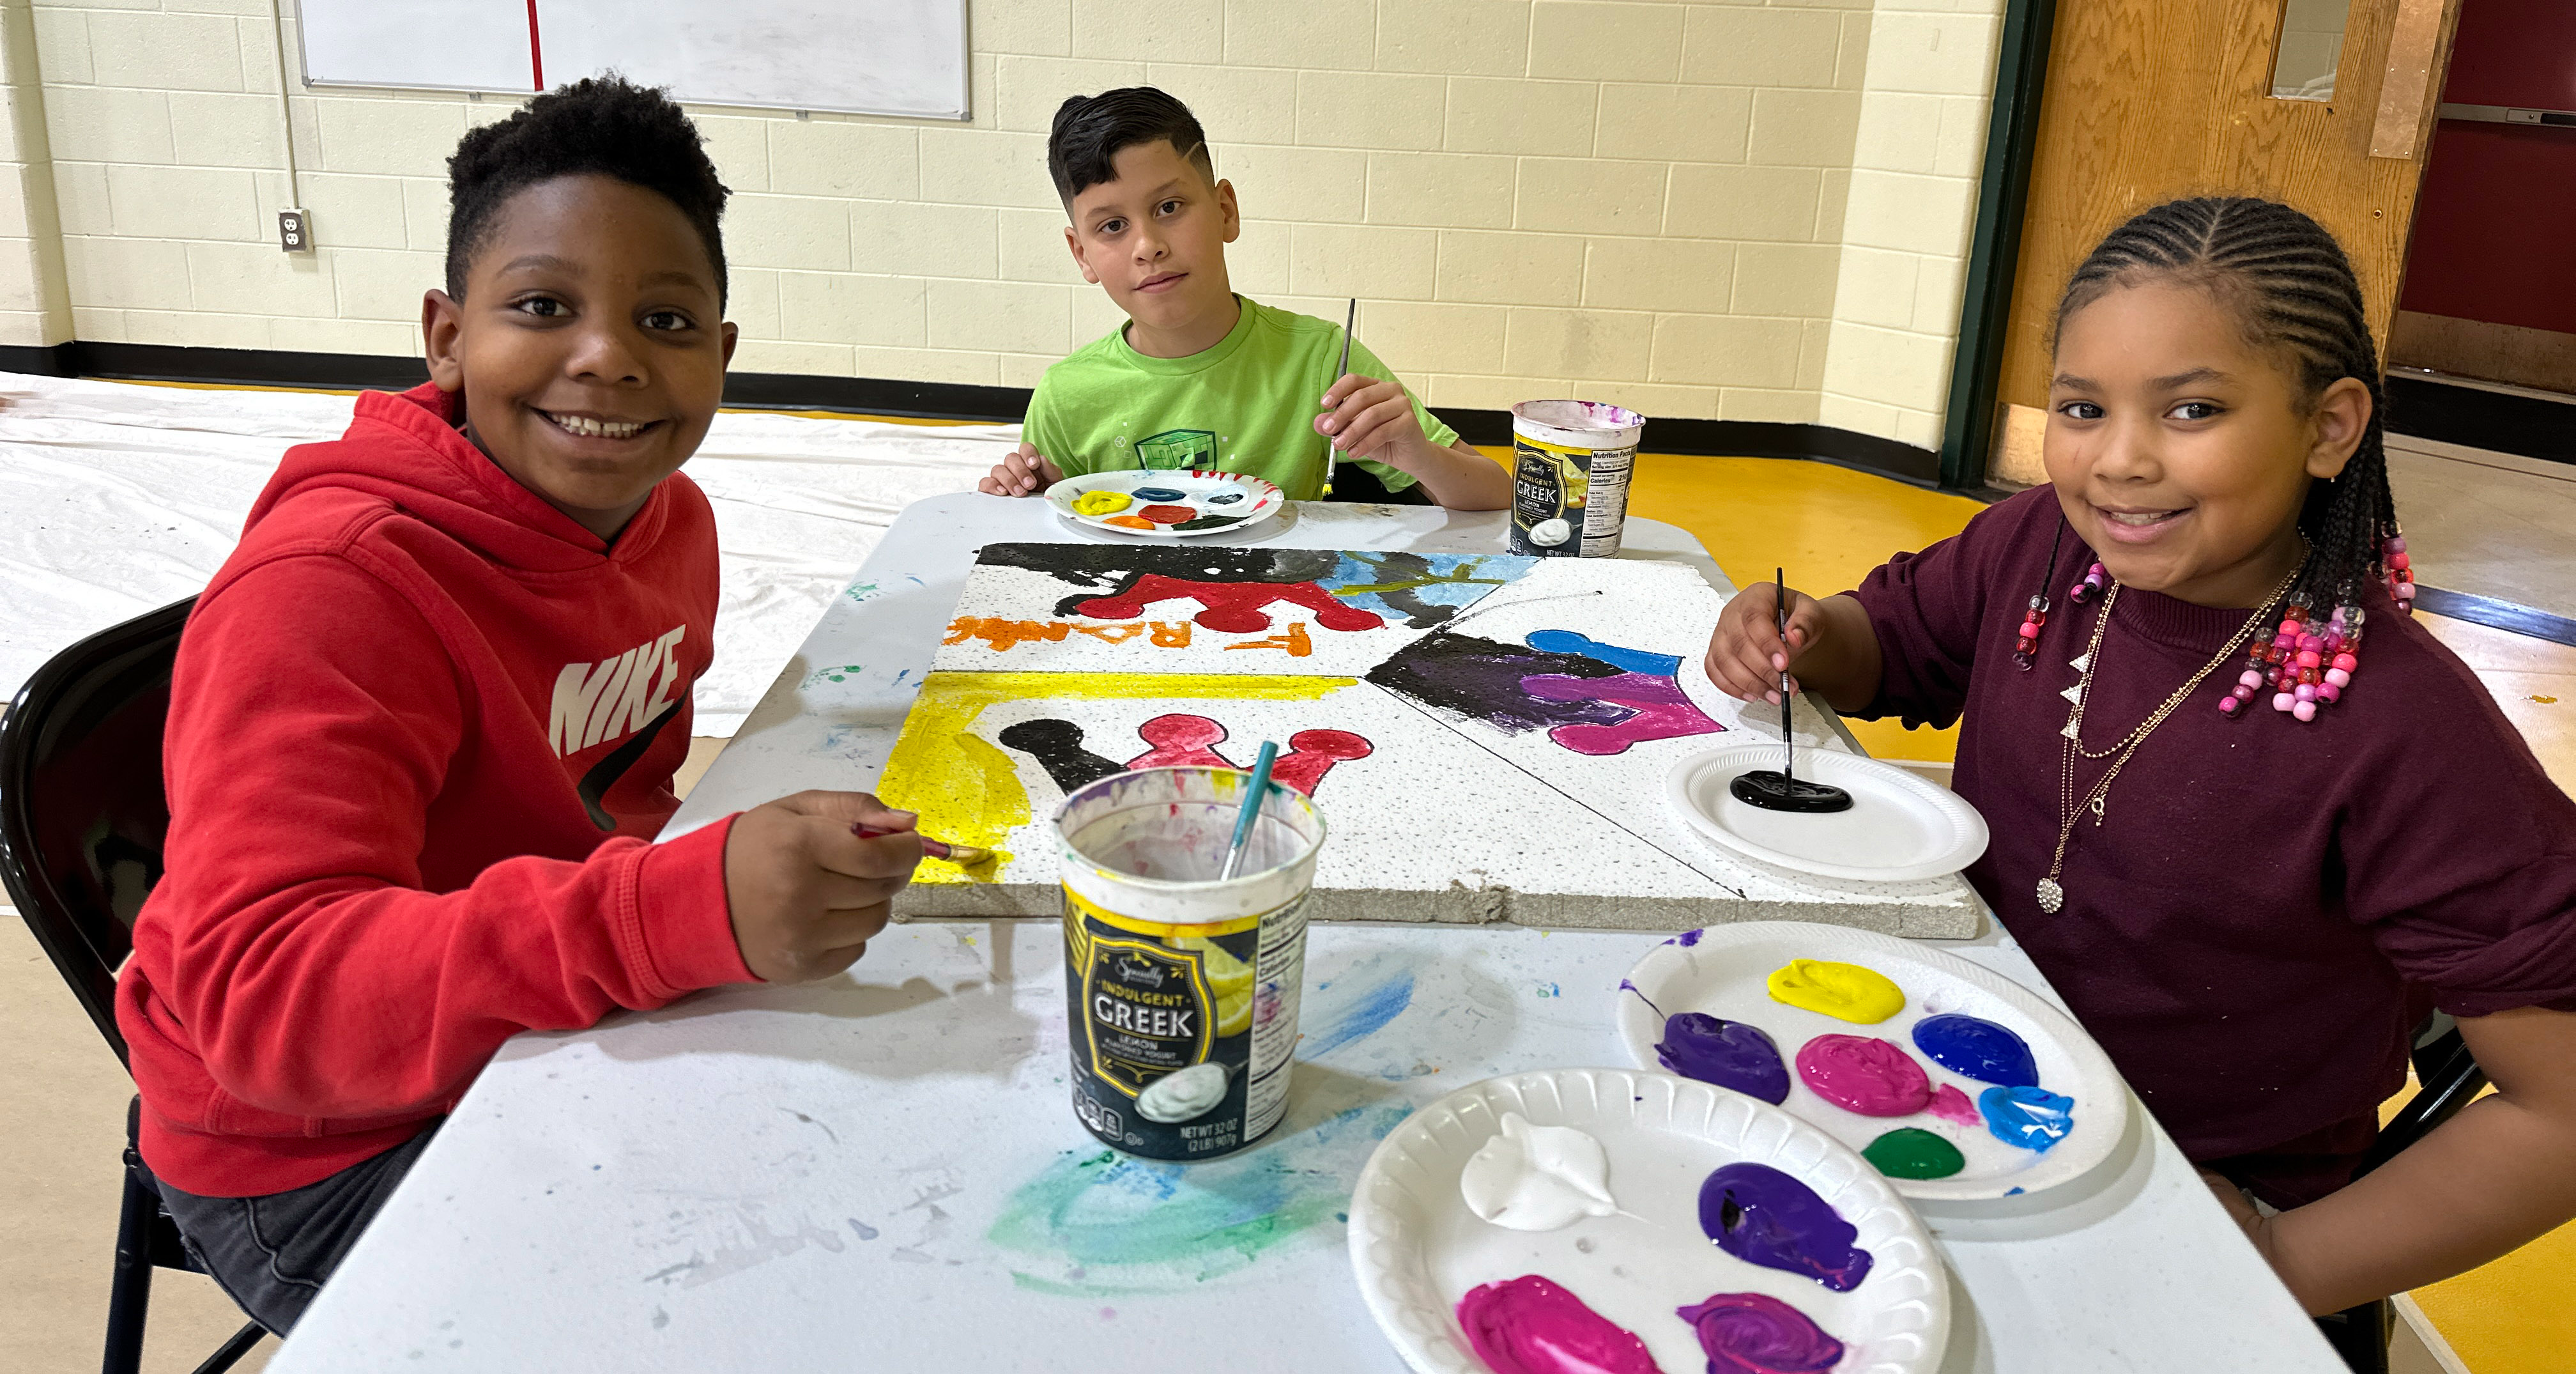 Three students painting a ceiling tile